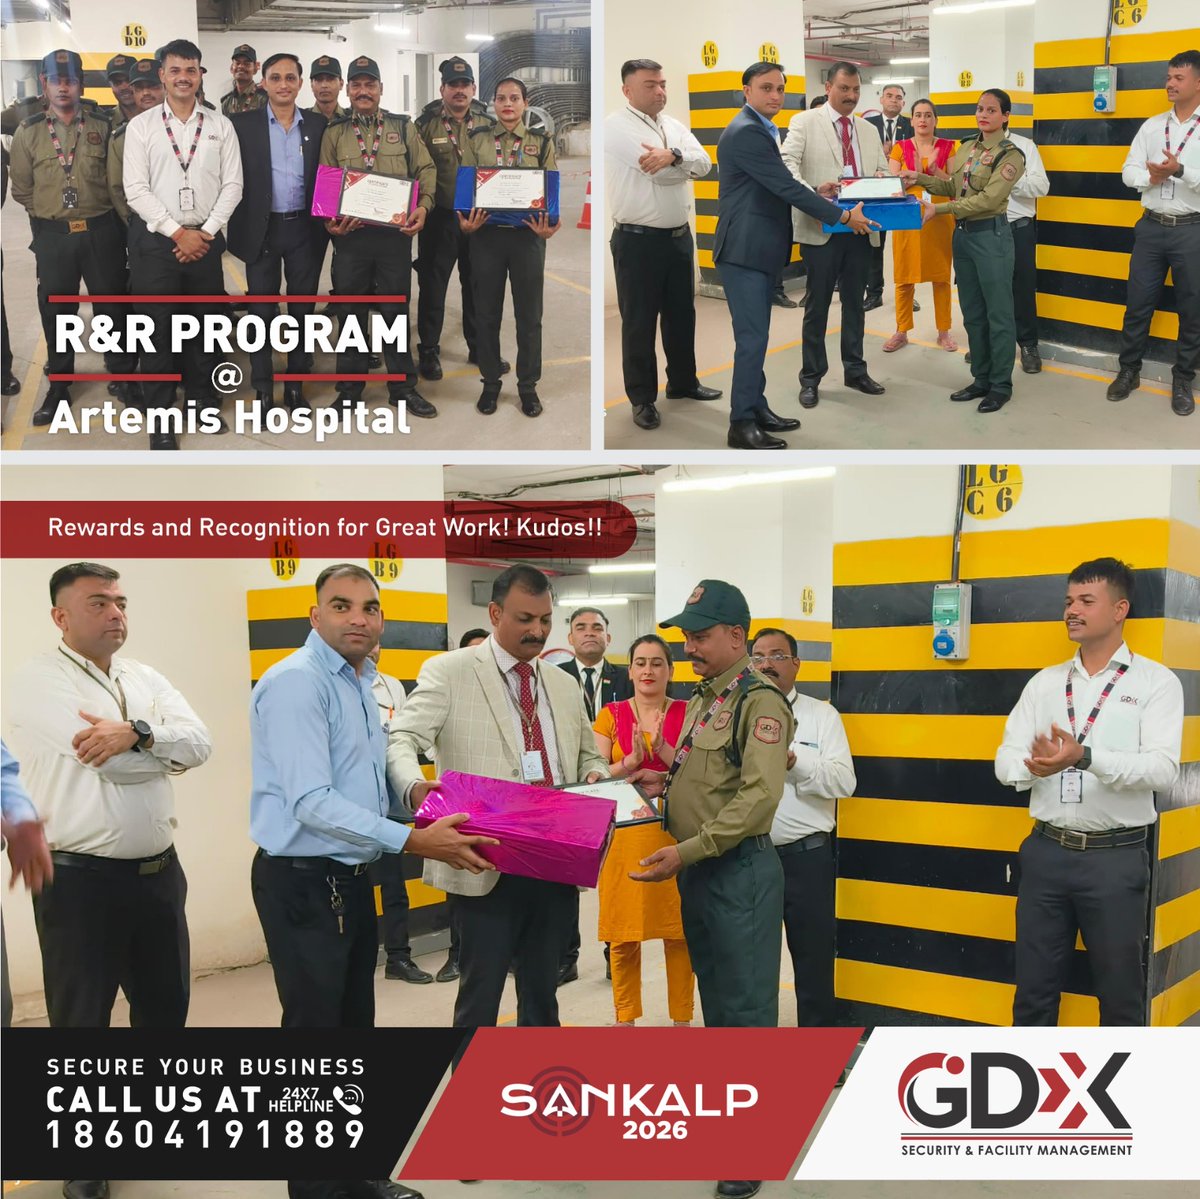 In R&R activity at Artemis Hospital, the Admin Head took time to appreciate and reward our hardworking security team members for their exceptional contributions. 

Call us anytime at our 24x7 helpline: 18604191889 #FacilityManagement #SecurityManagement  #Sankalp2026